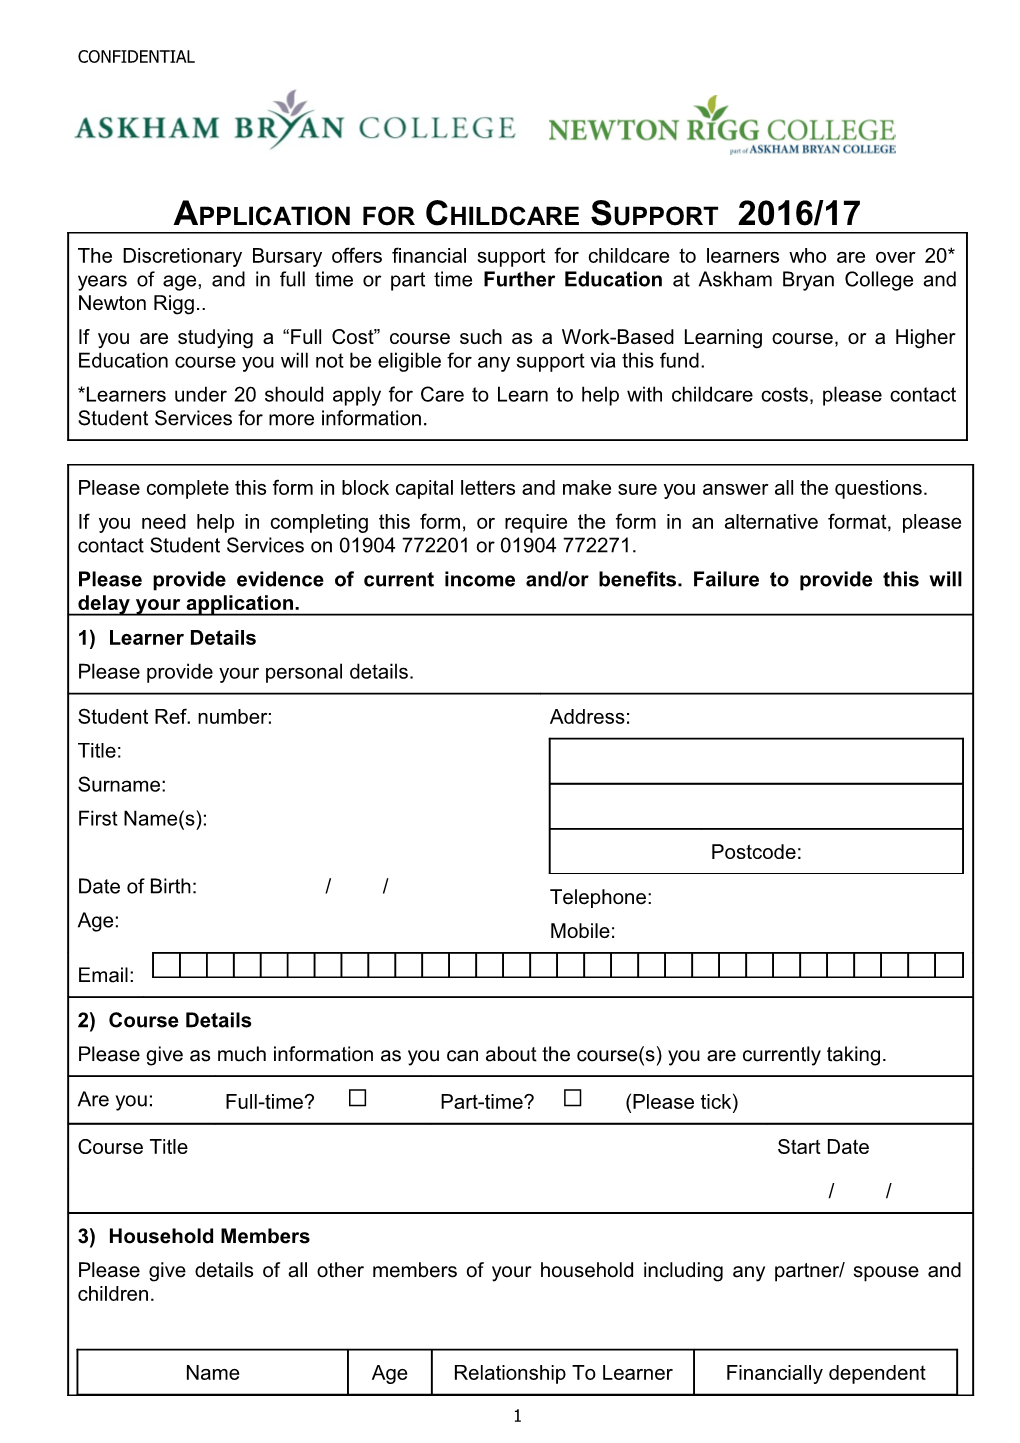 Application for Childcare Support 2016/17